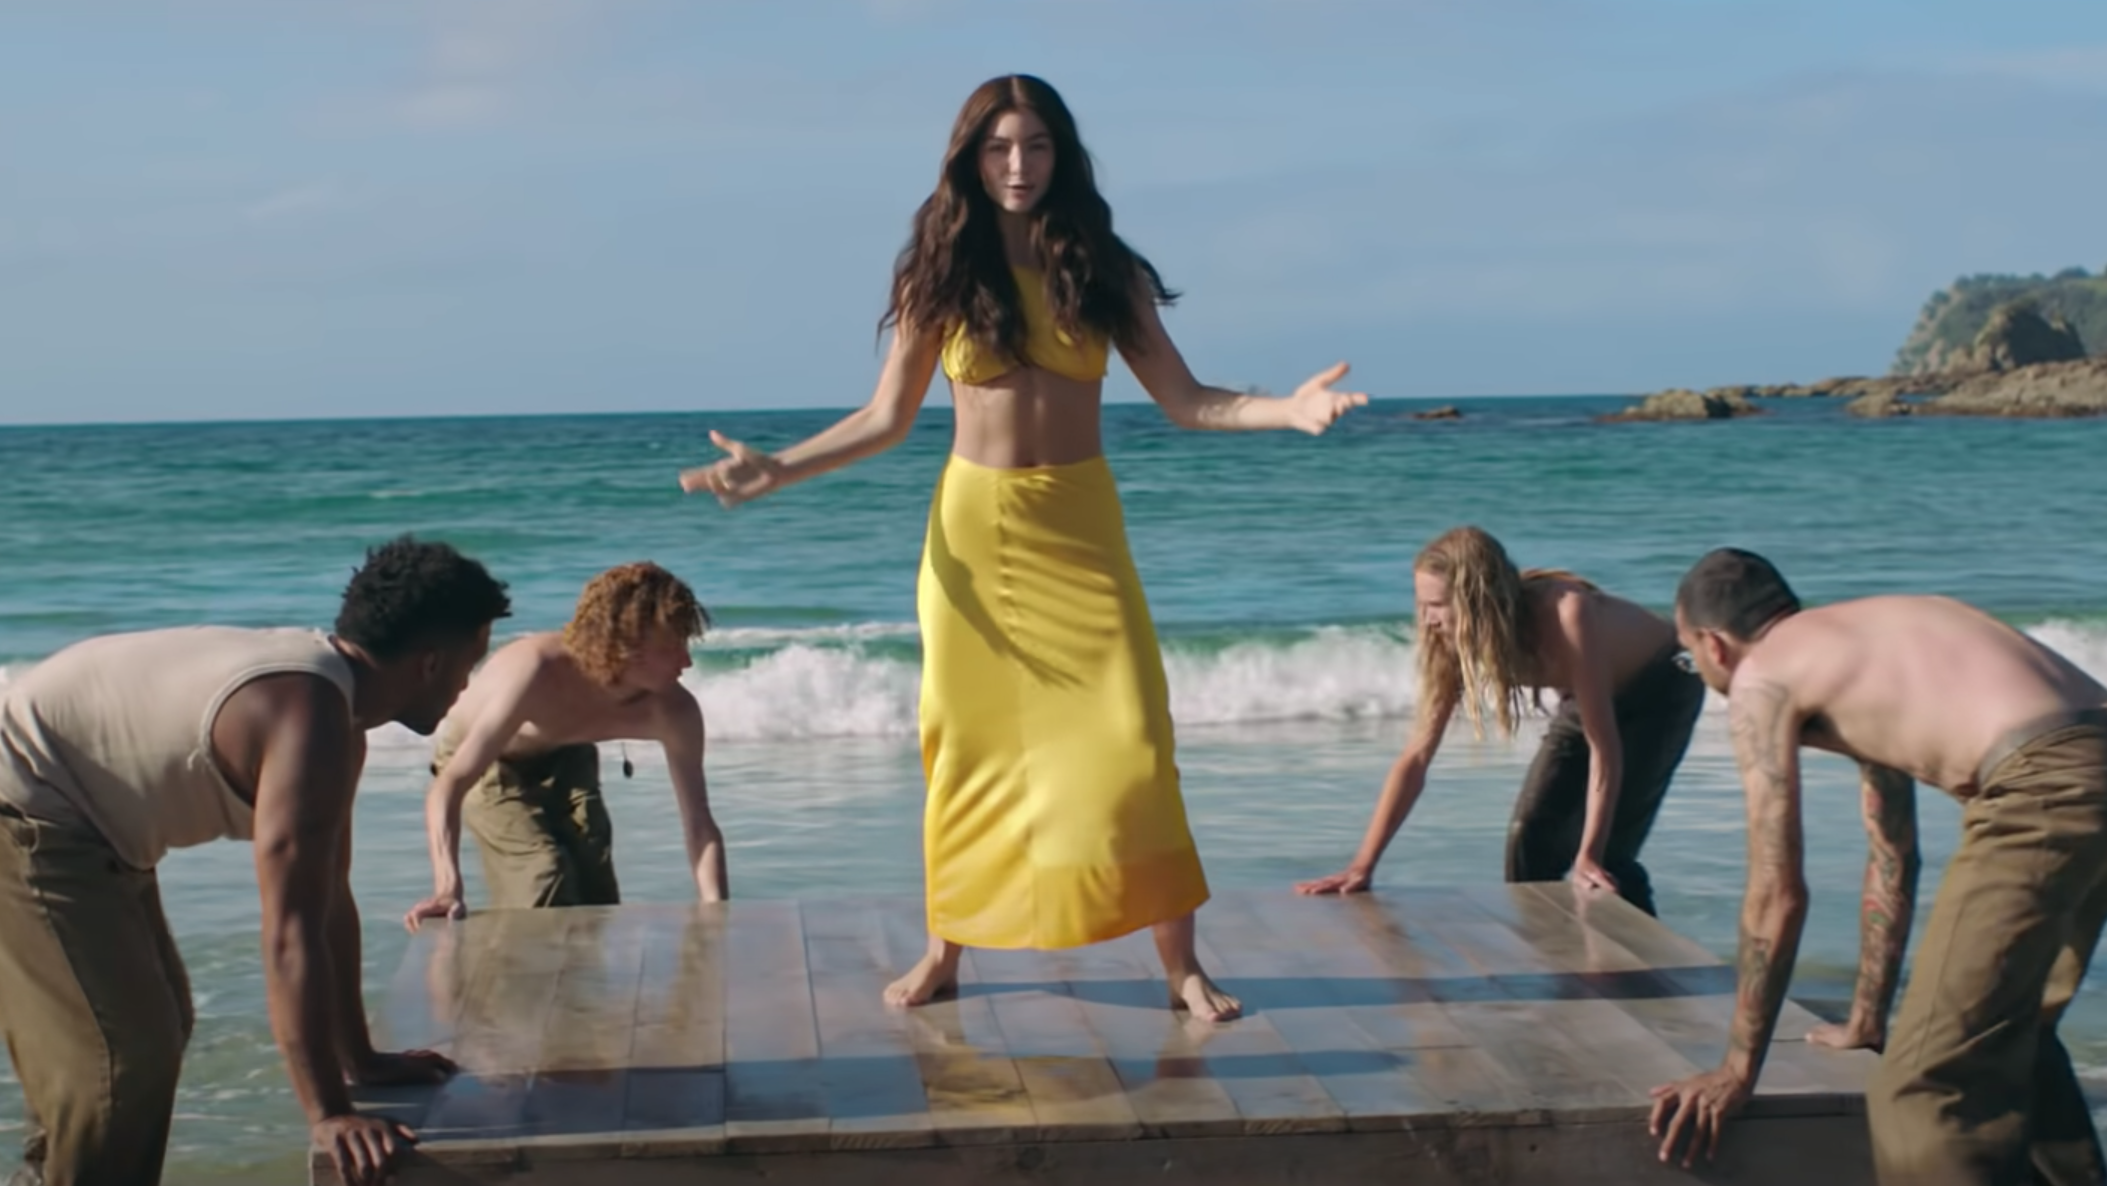 Lorde's outfit from the "Solar Power" video is back on sale after going viral